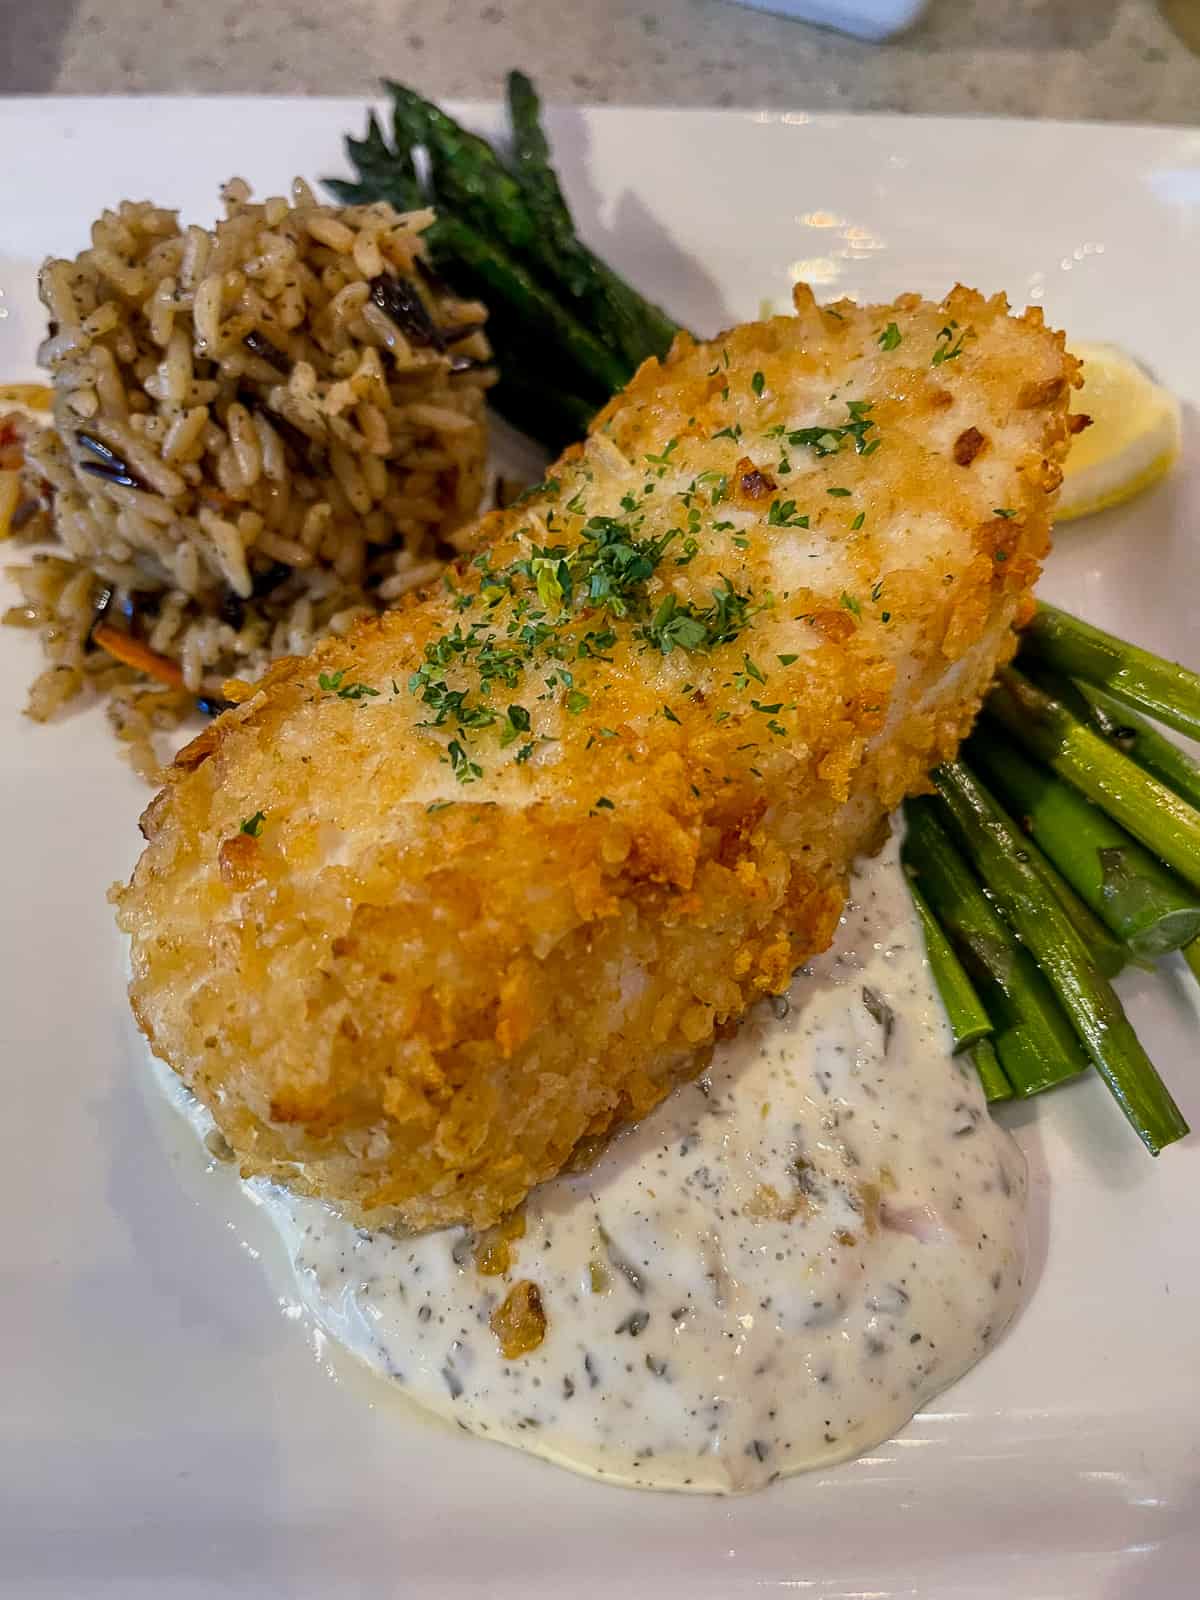 A plate of halibut on tarter sauce with asparagus.